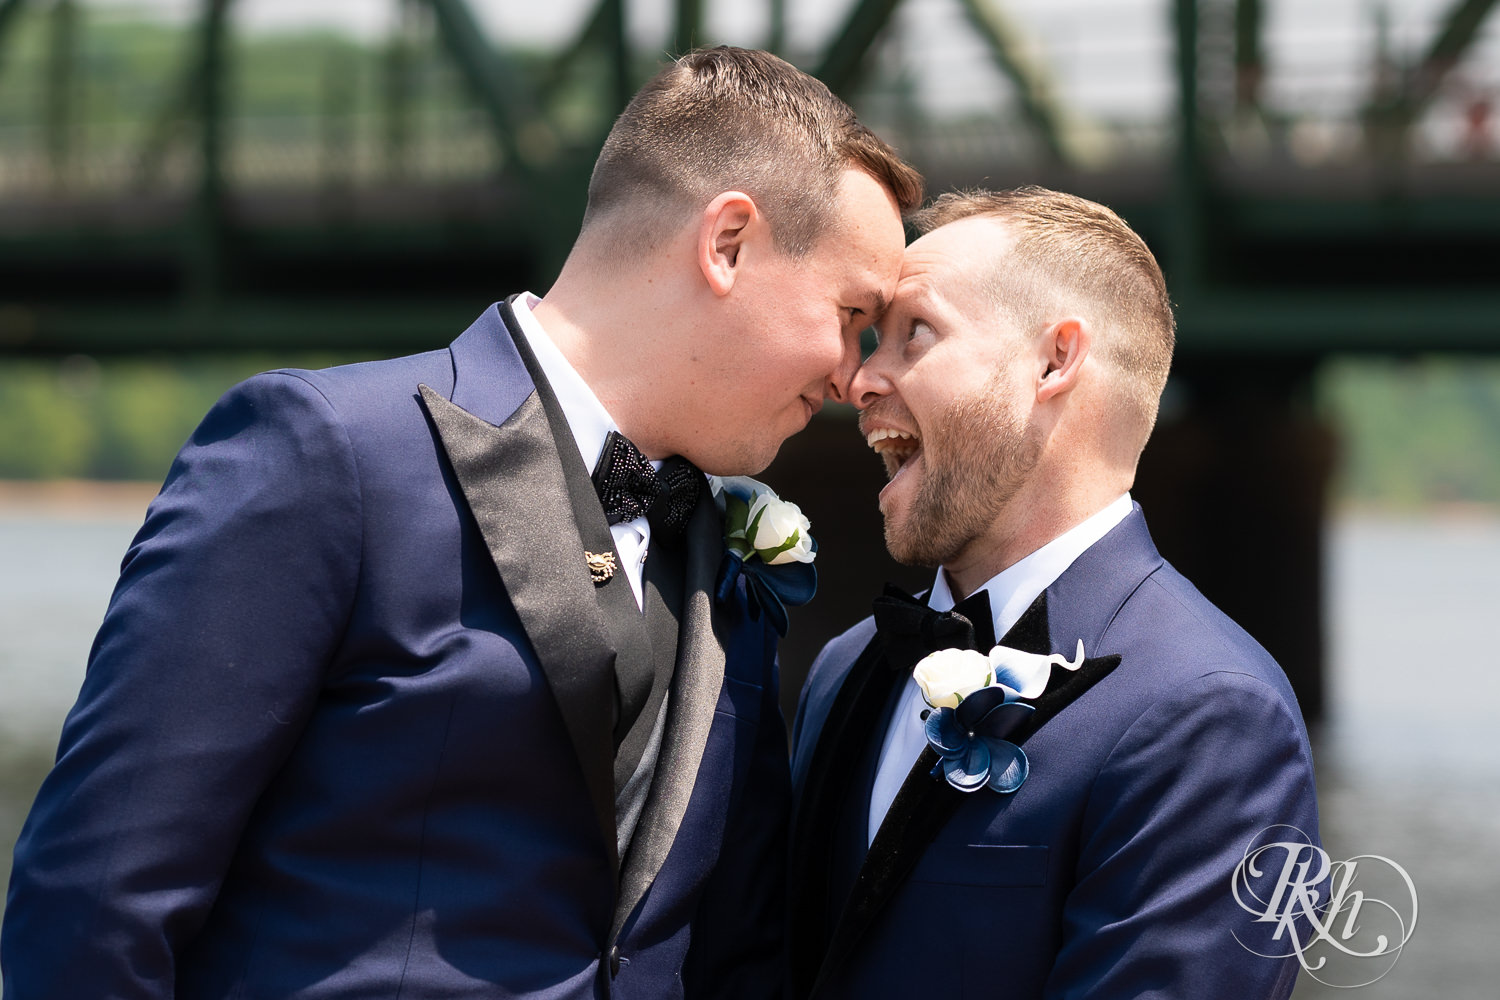 Grooms in blue tuxedos laugh before gay wedding in Stillwater, Minnesota.